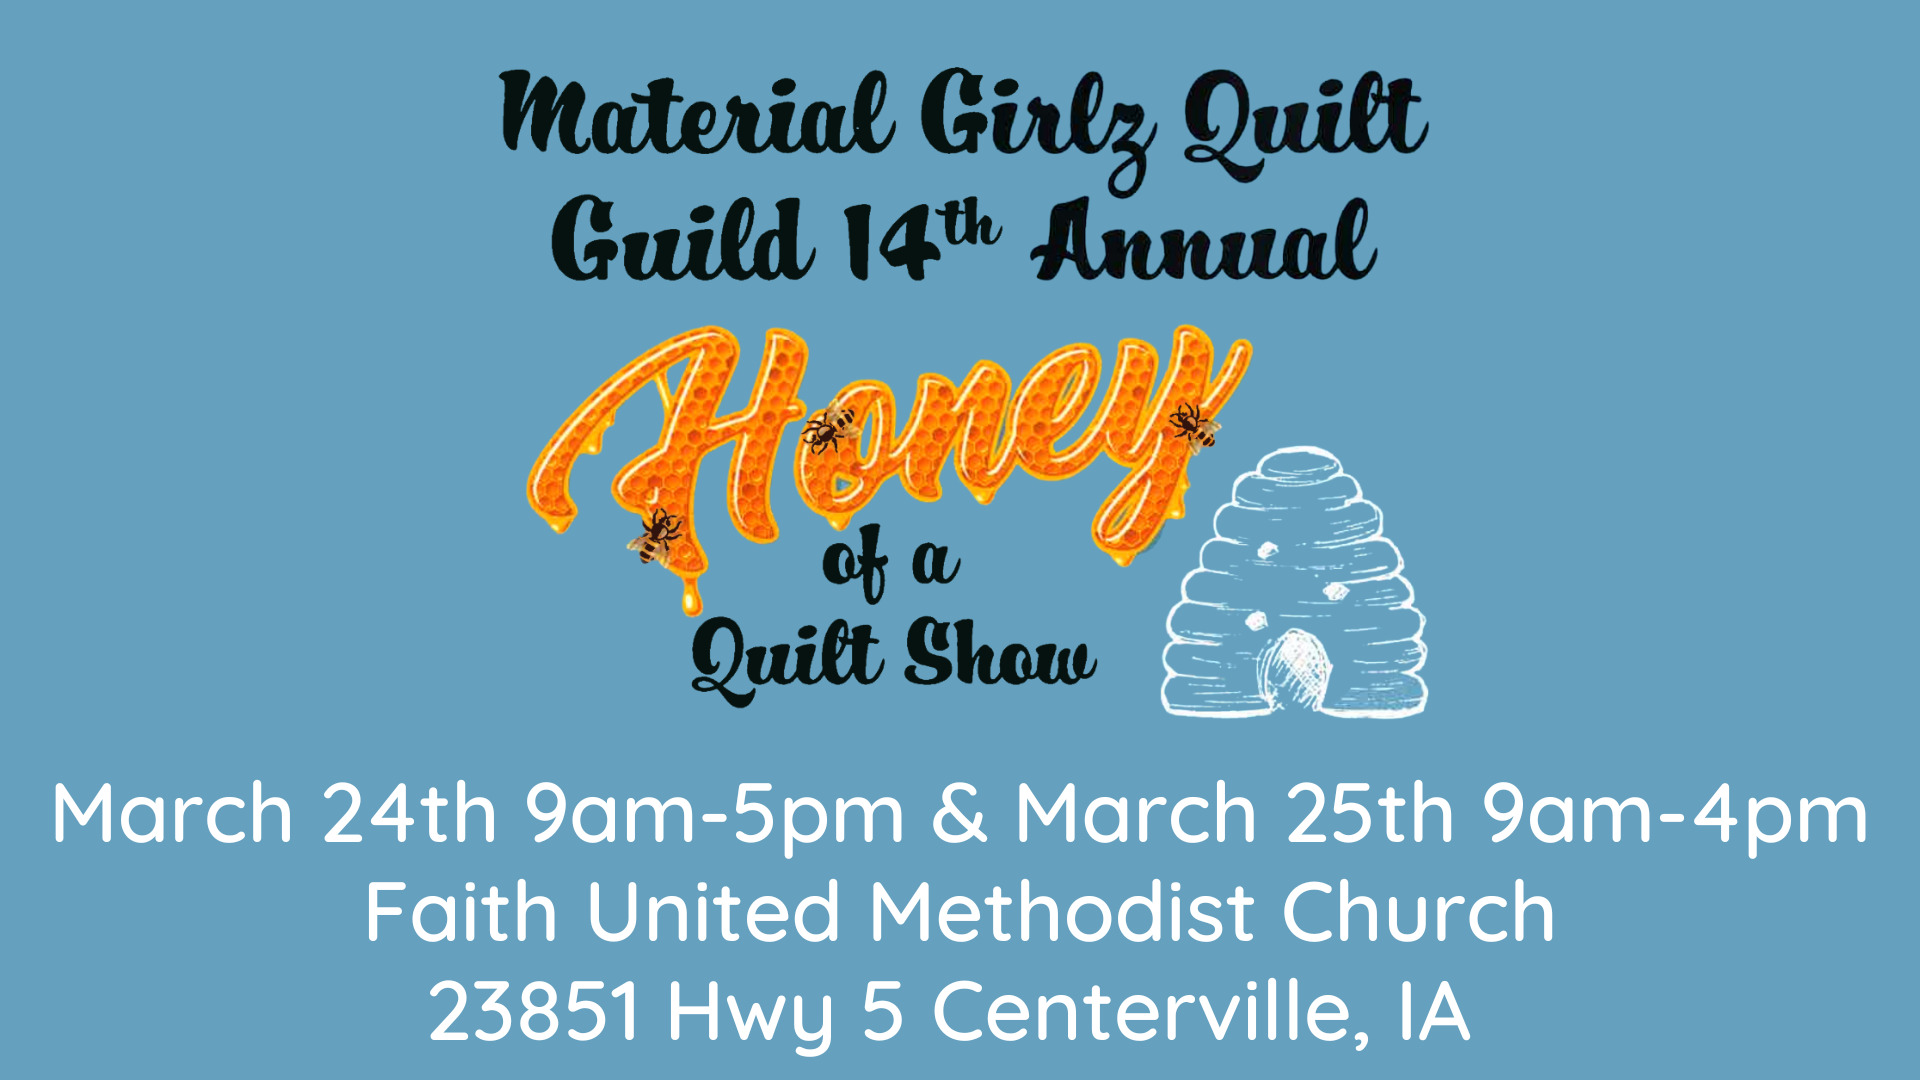 Material Girlz Quilt Guild 14th Annual Honey of a Quilt Show. March 24th & 25th in Centerville, Iowa